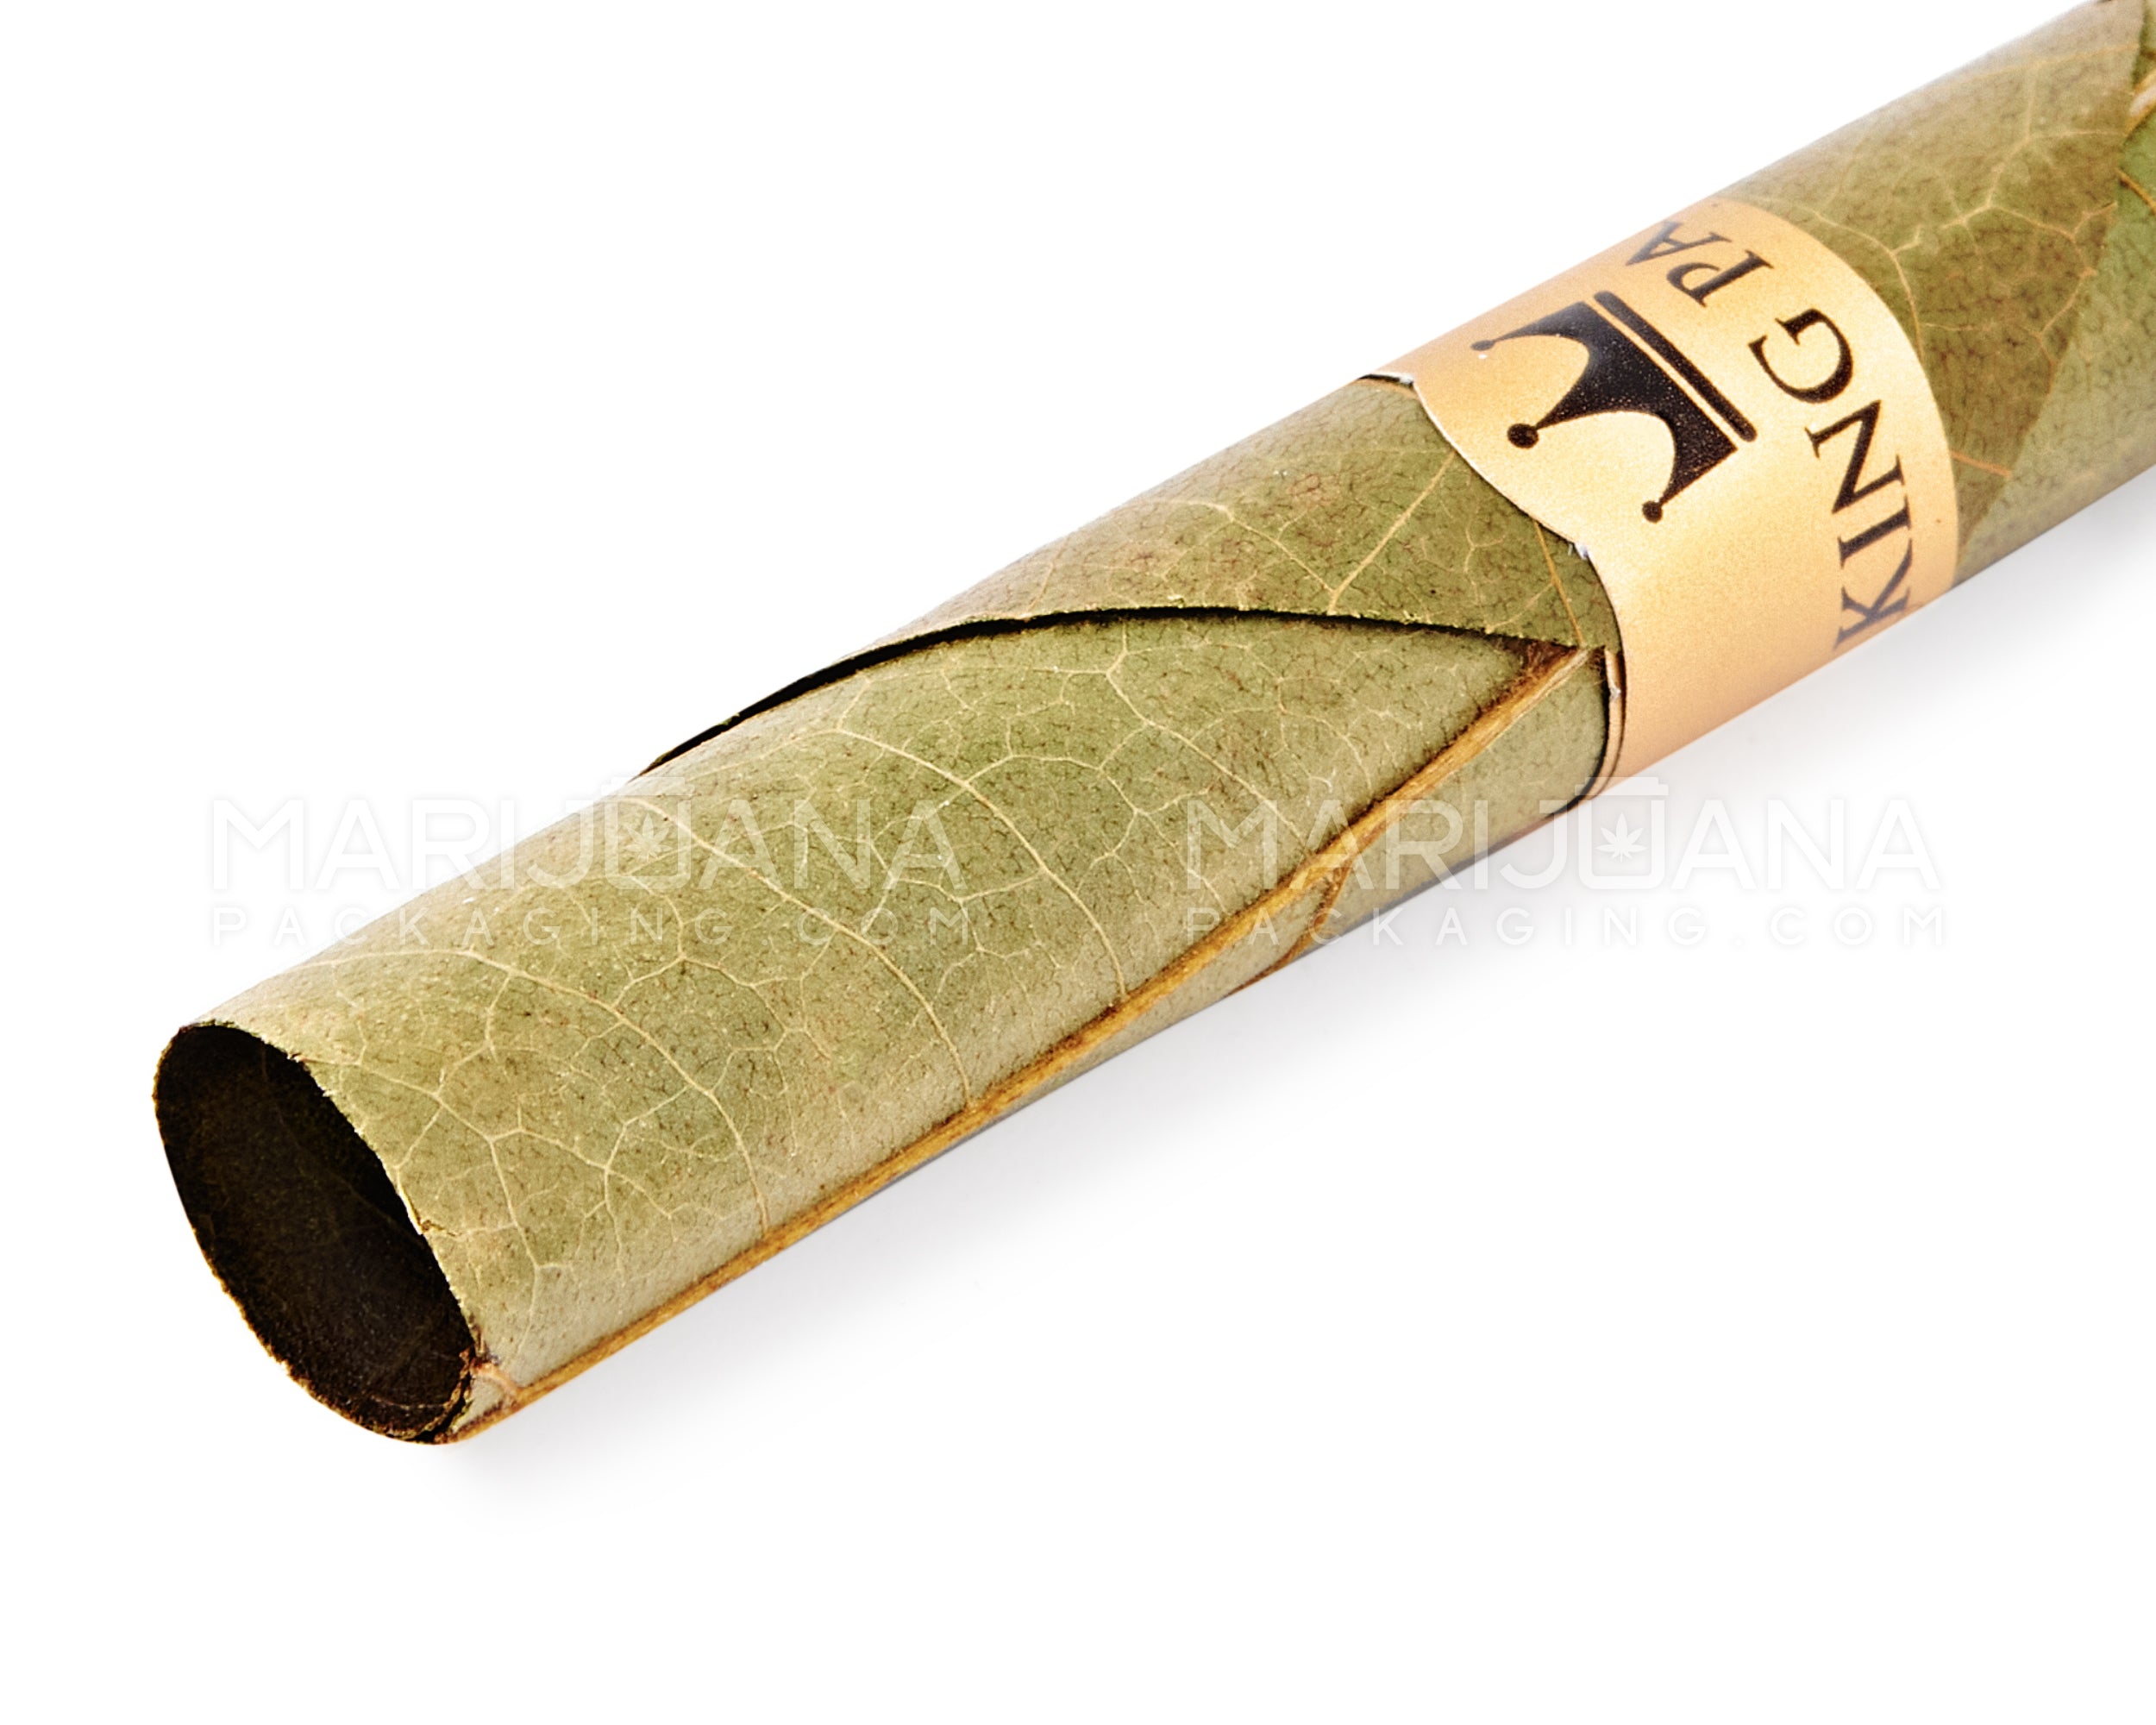 KING PALM | 'Retail Display' Rollie Green Natural Leaf Blunt Wraps | 54mm - Cherry Charm - 20 Count - 7